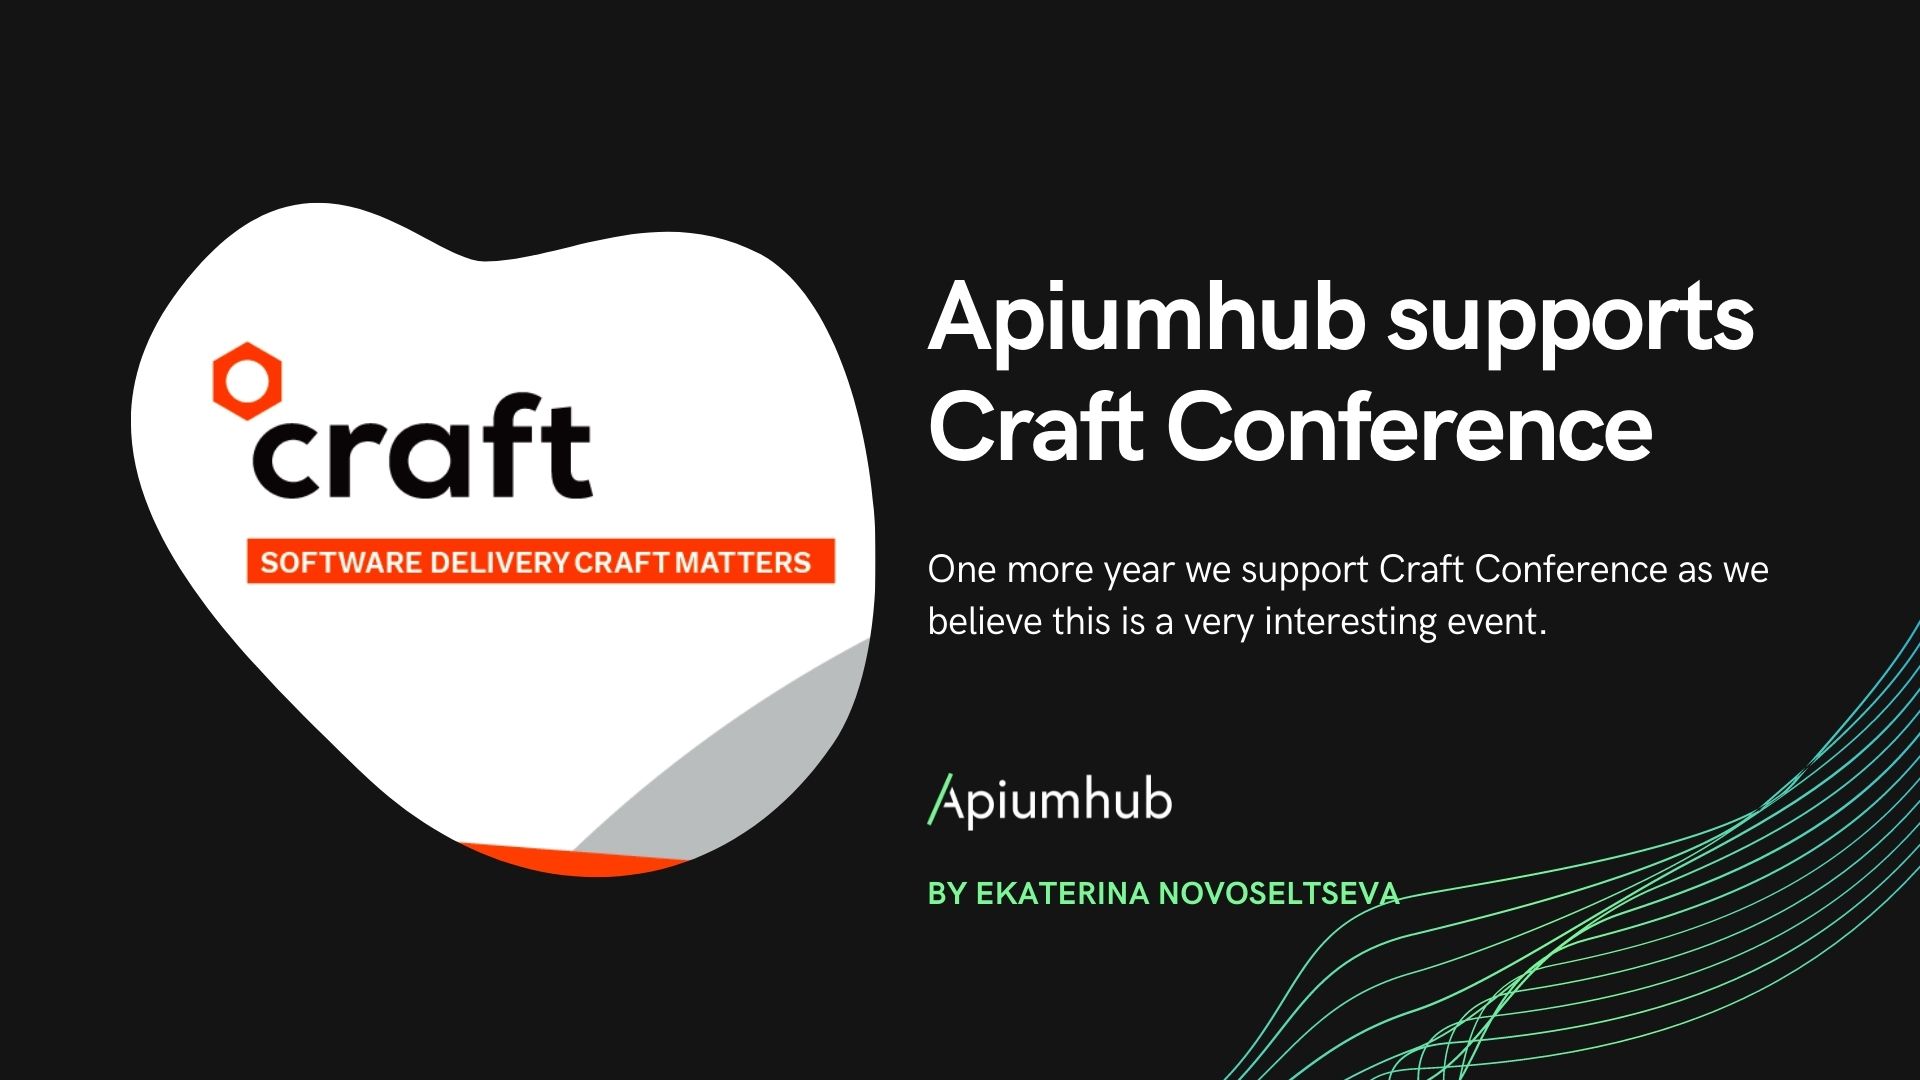 Apiumhub supports Craft Conference one more year